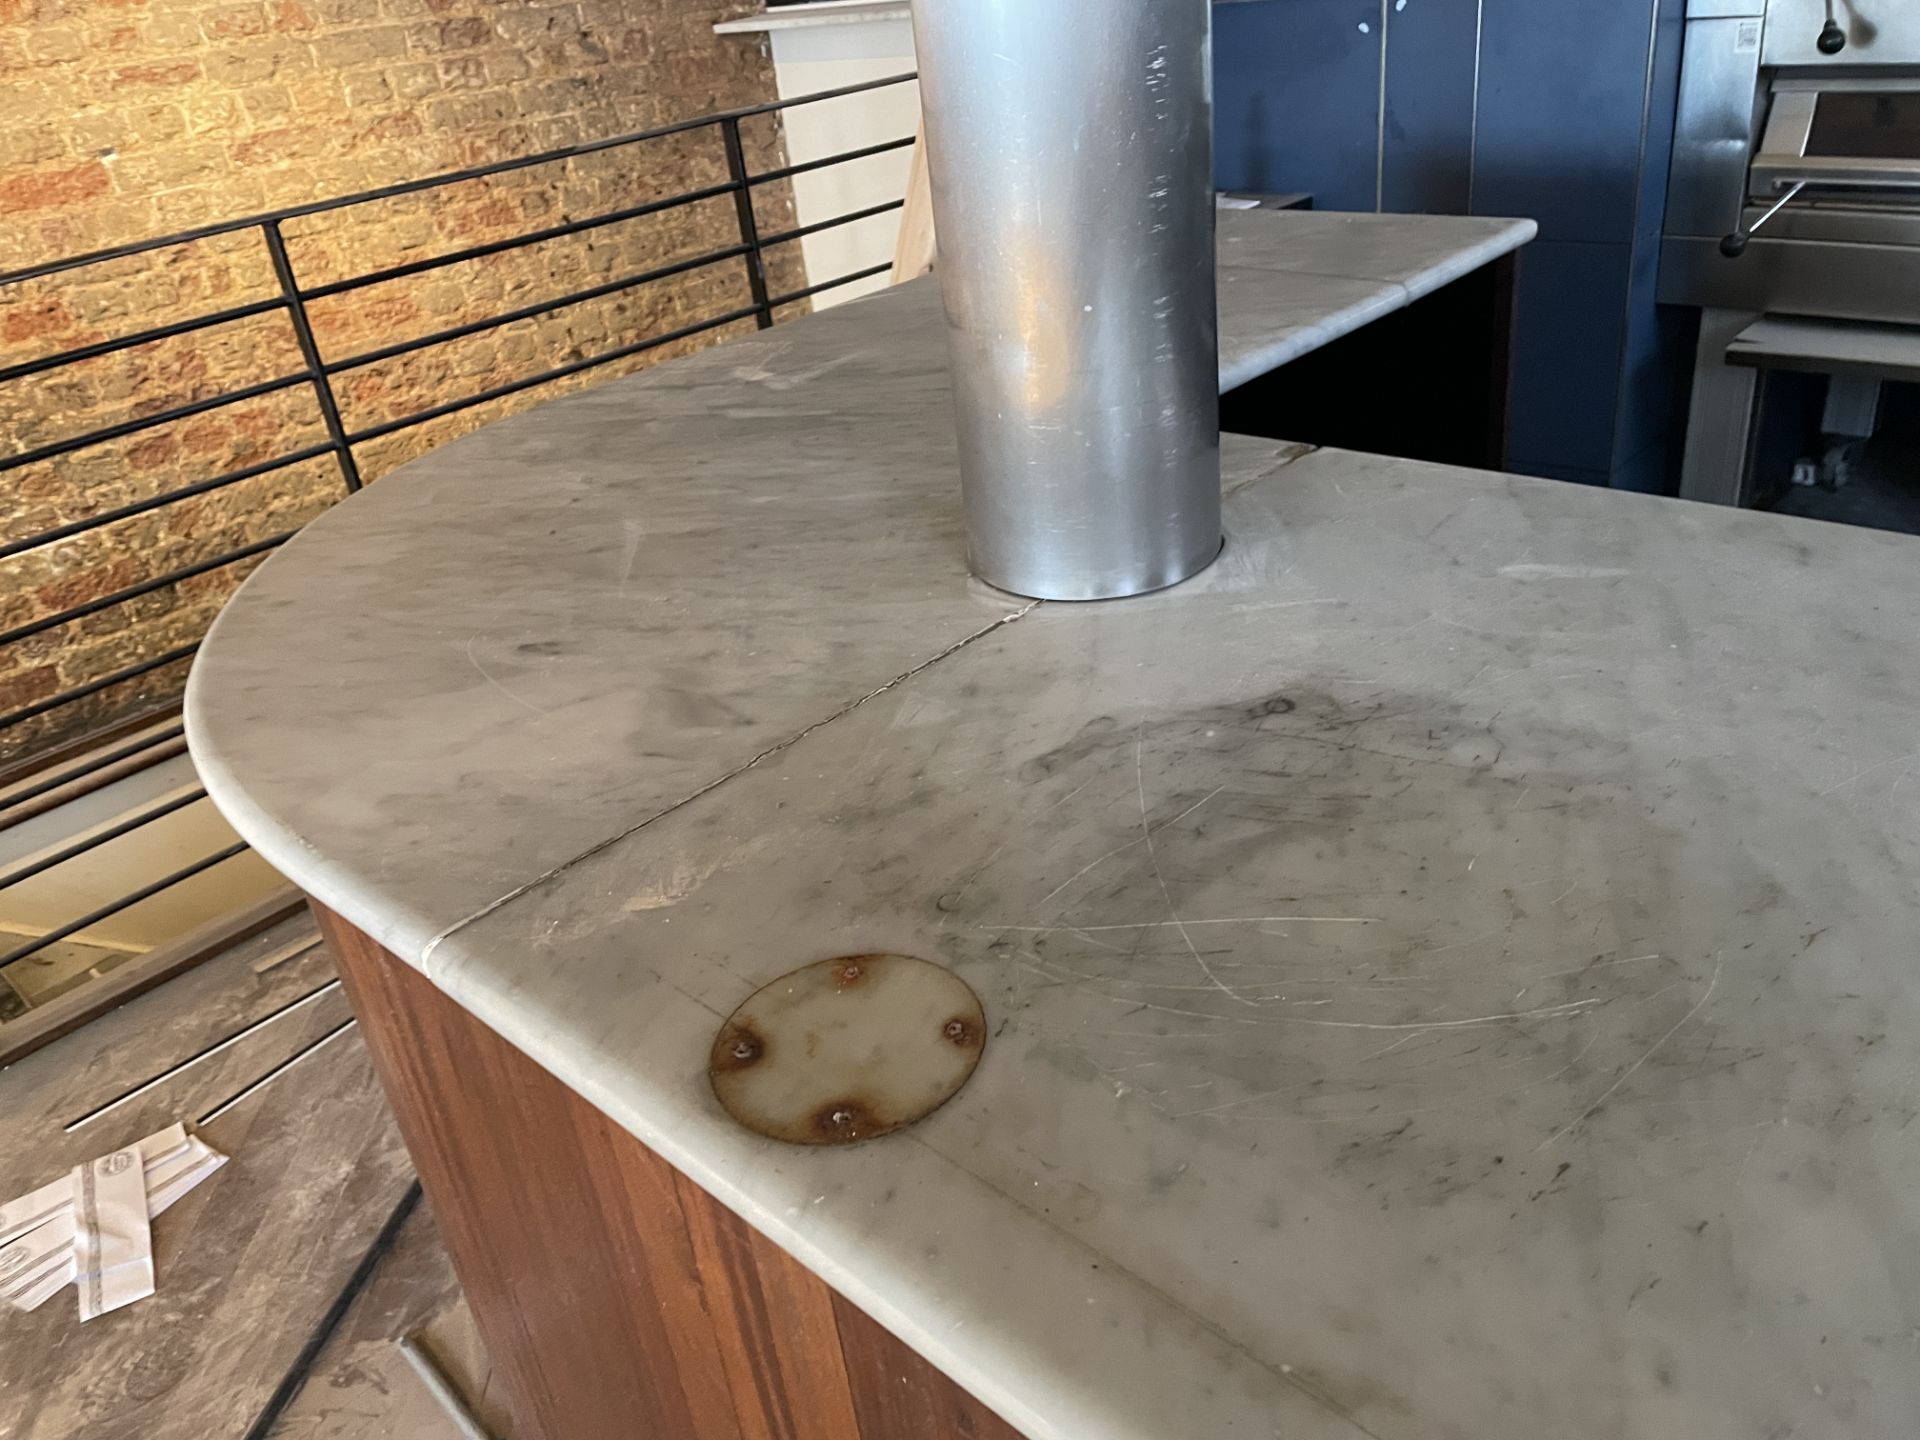 1 x Restaurant Service Bar Featuring Marble Top, Wood Panel Fascia and Rear Prep Area With Hand Wash - Image 9 of 15